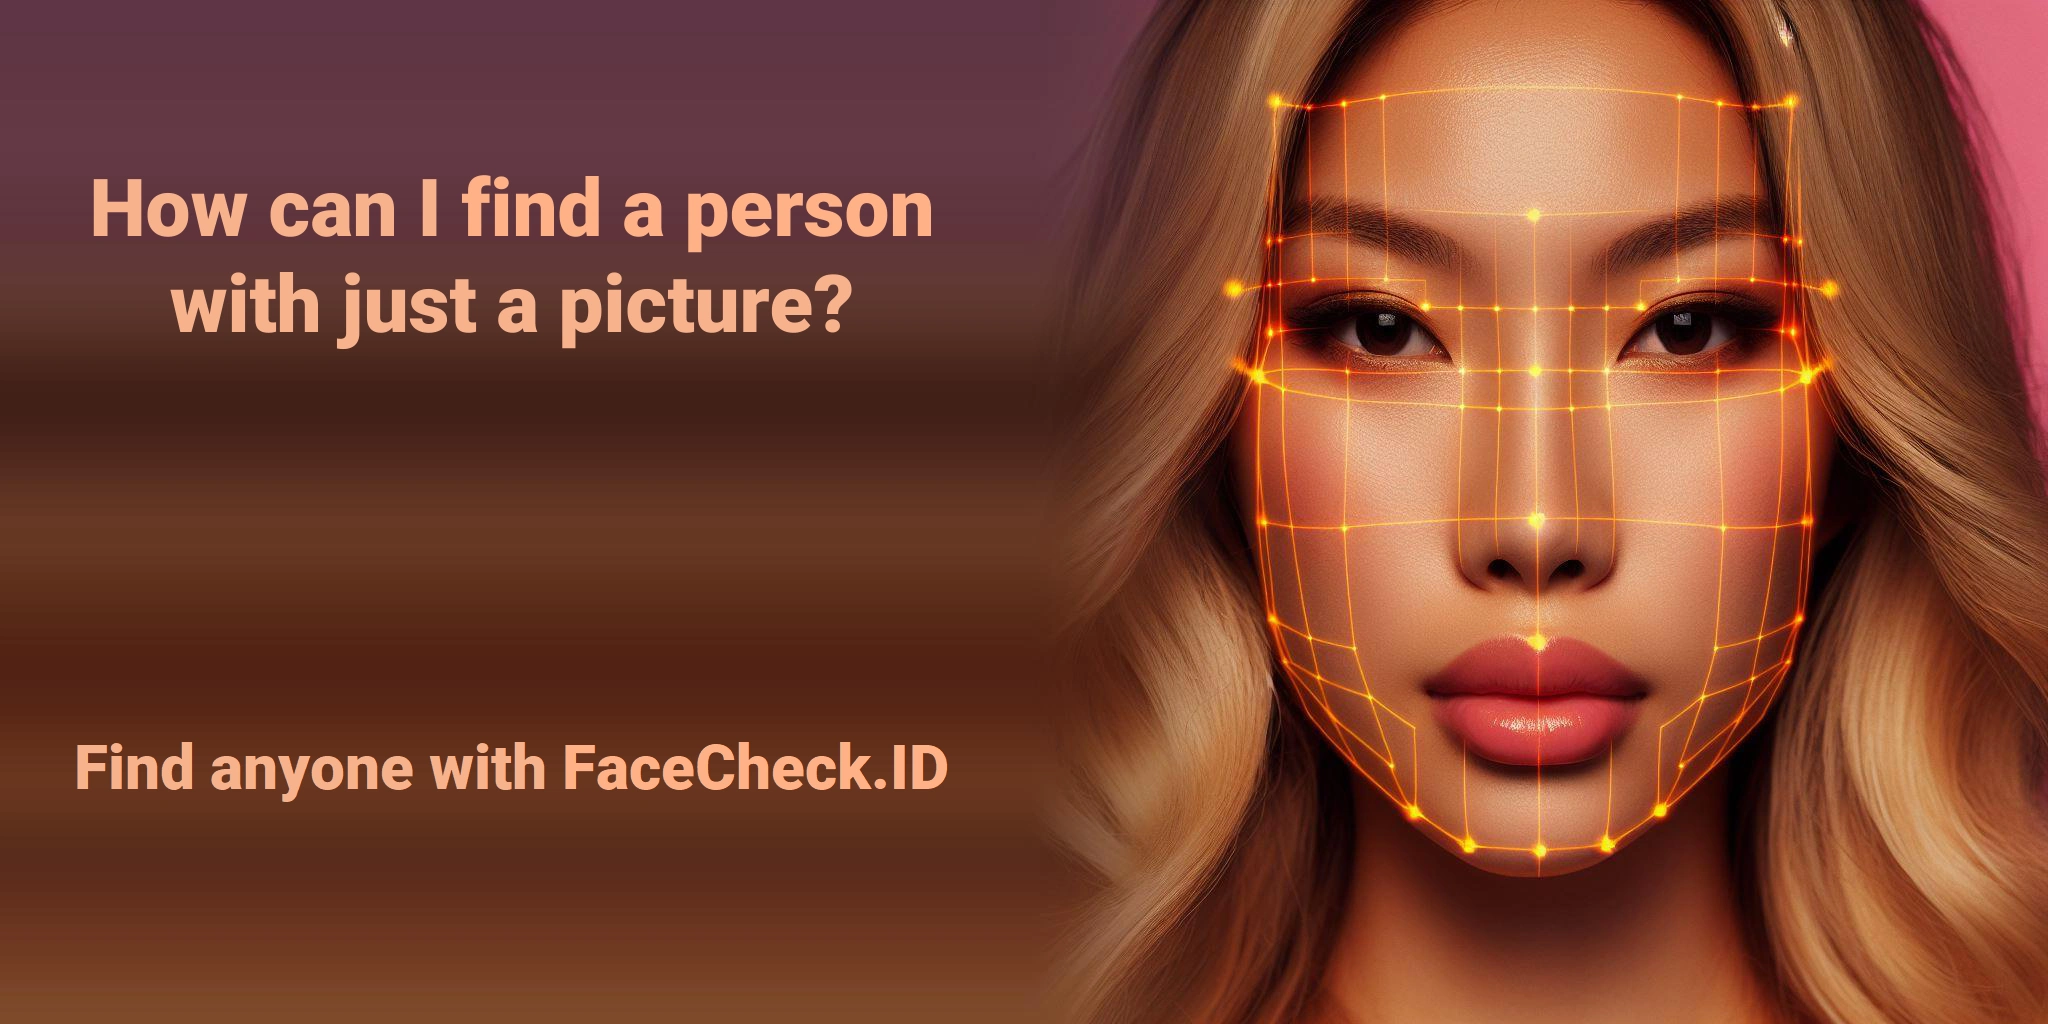 How can I find a person with just a picture? Find anyone with FaceCheck.ID